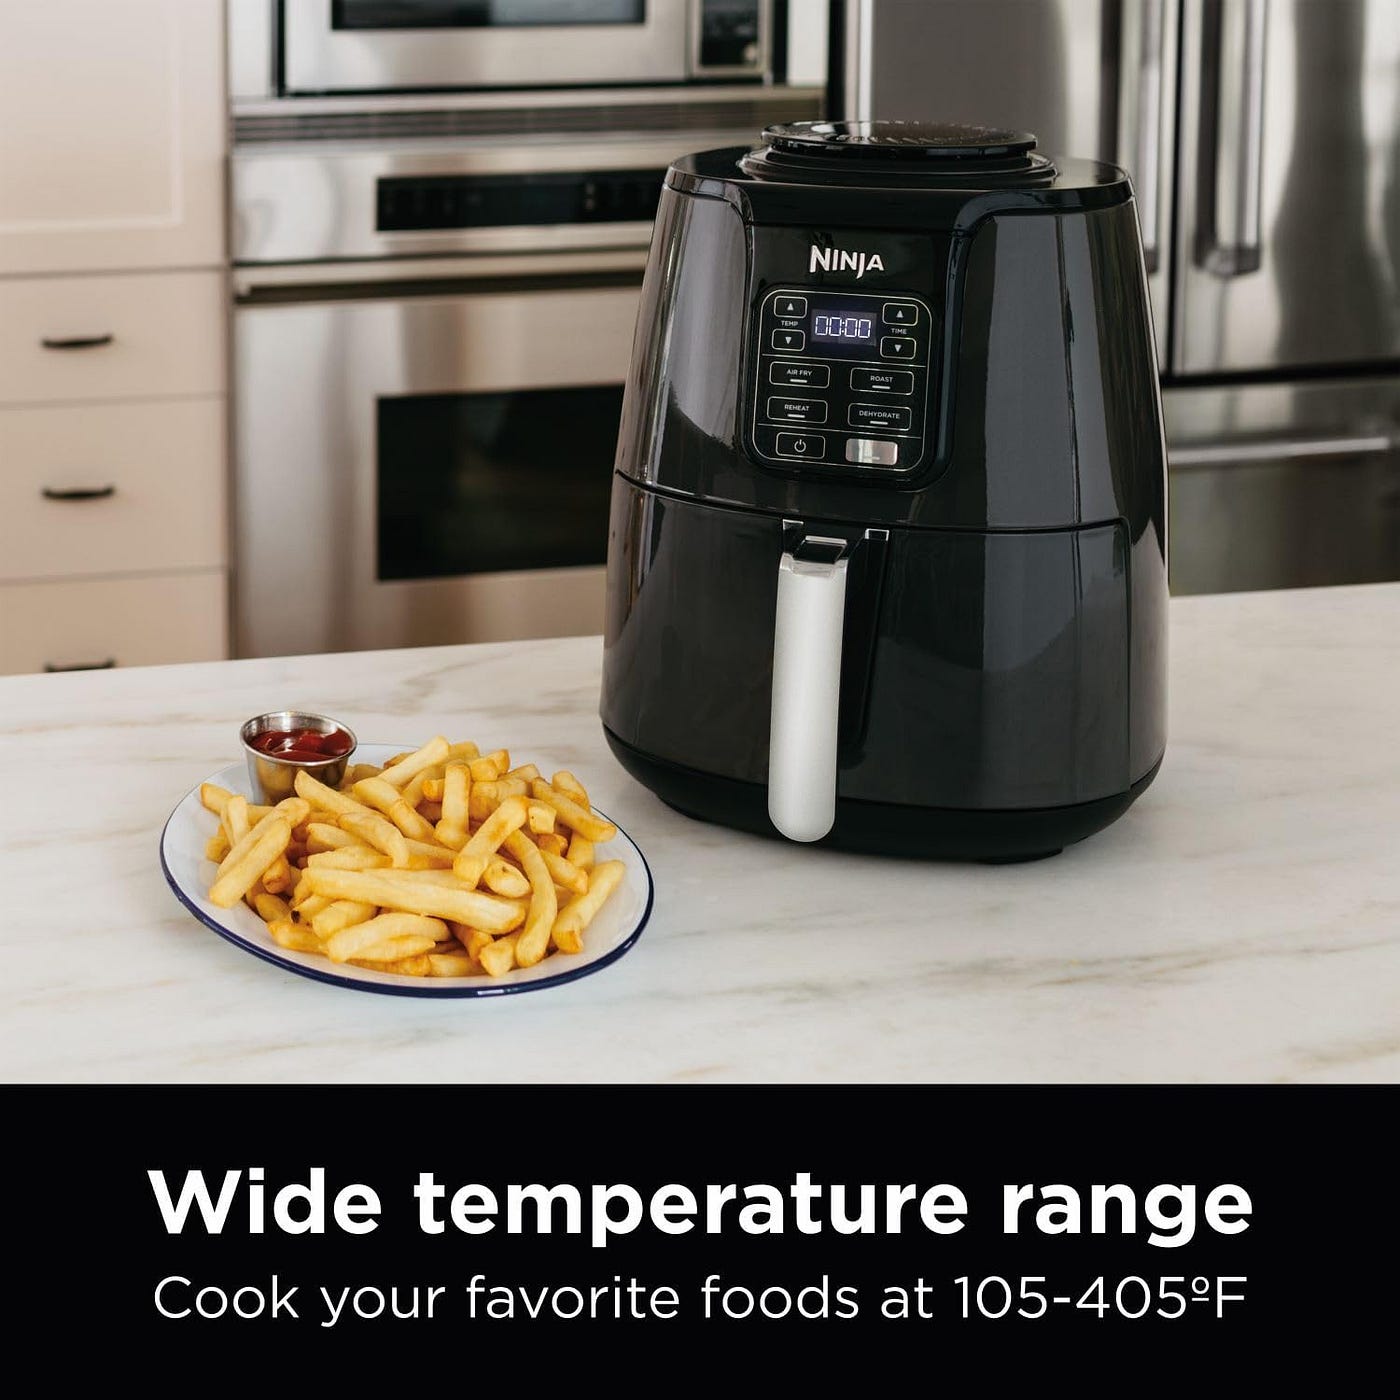 Air-Fryer Cooking Times for Your Favorite Foods